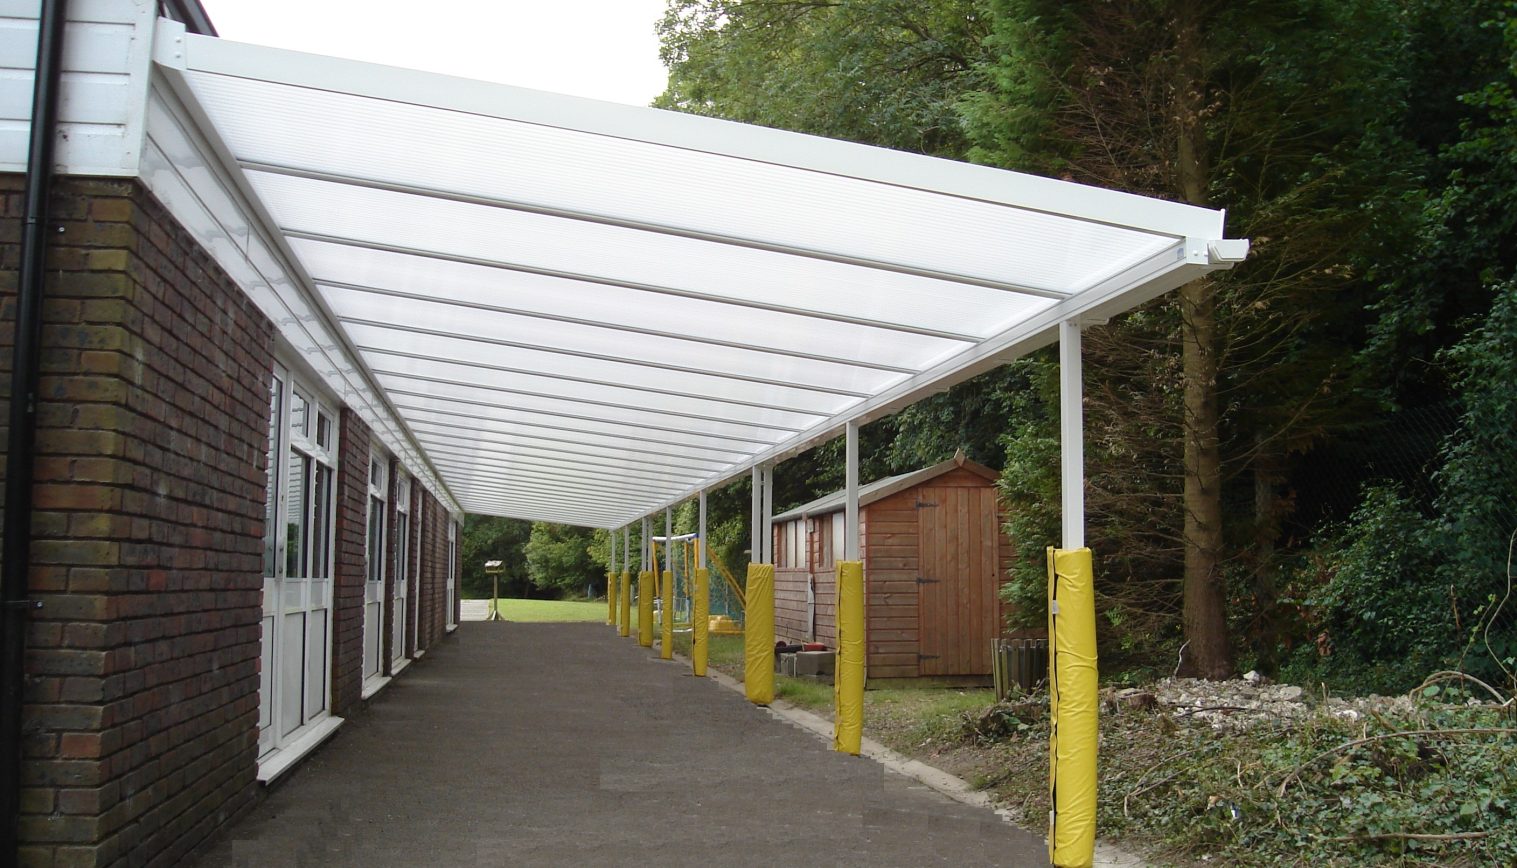 Loudwater Combined School – Wall mounted canopy